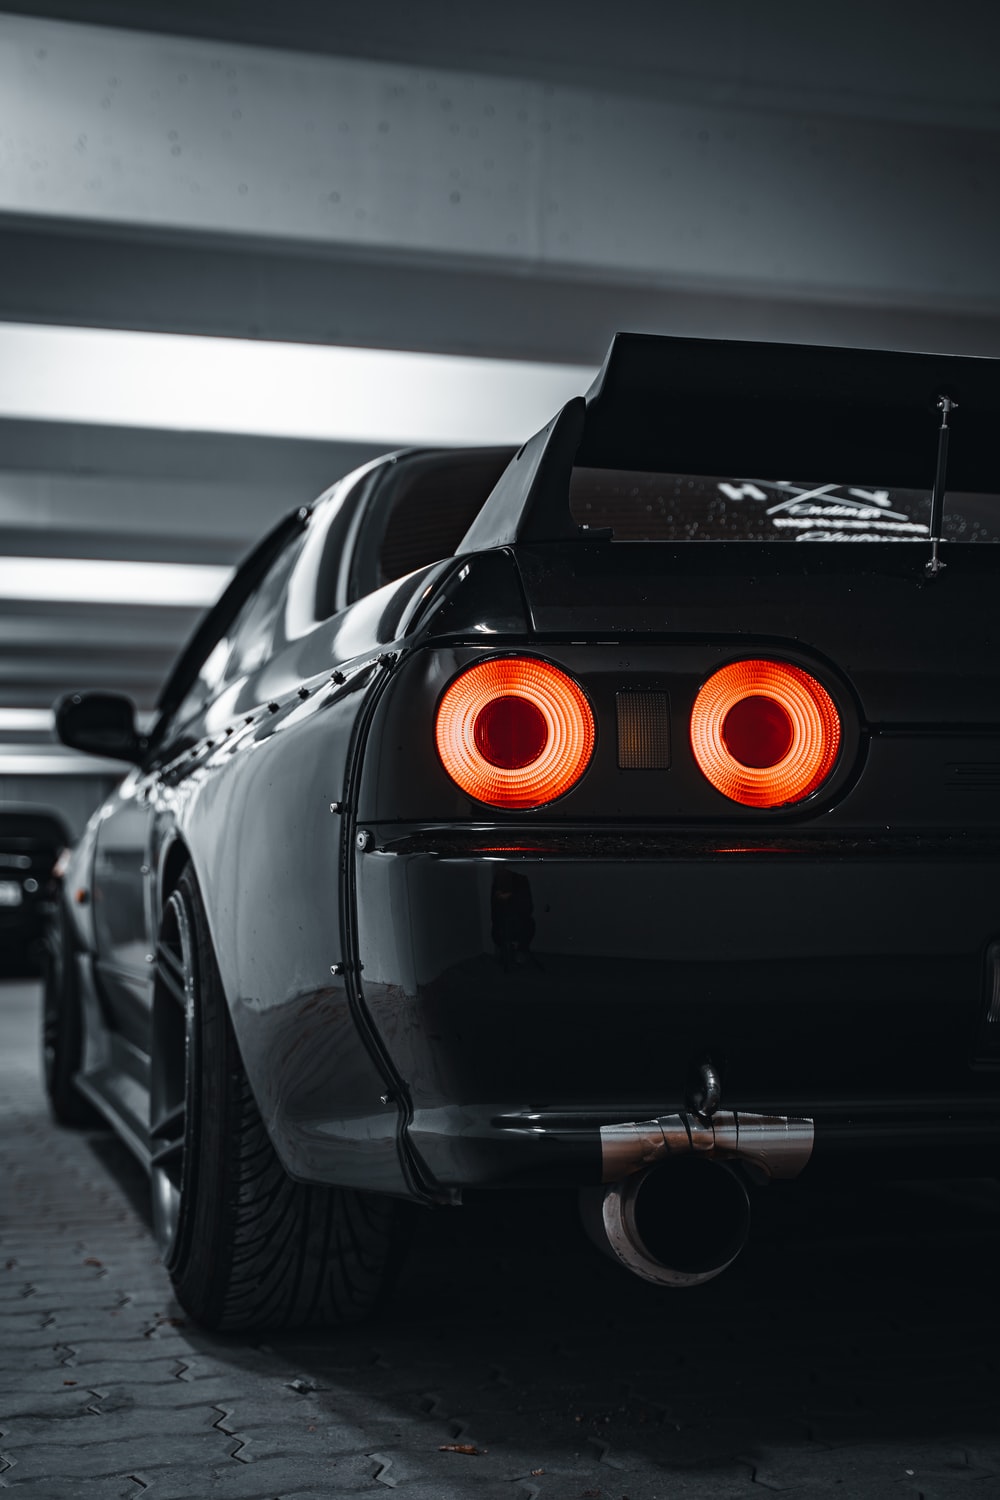 Jdm Picture [HD]. Download Free Image